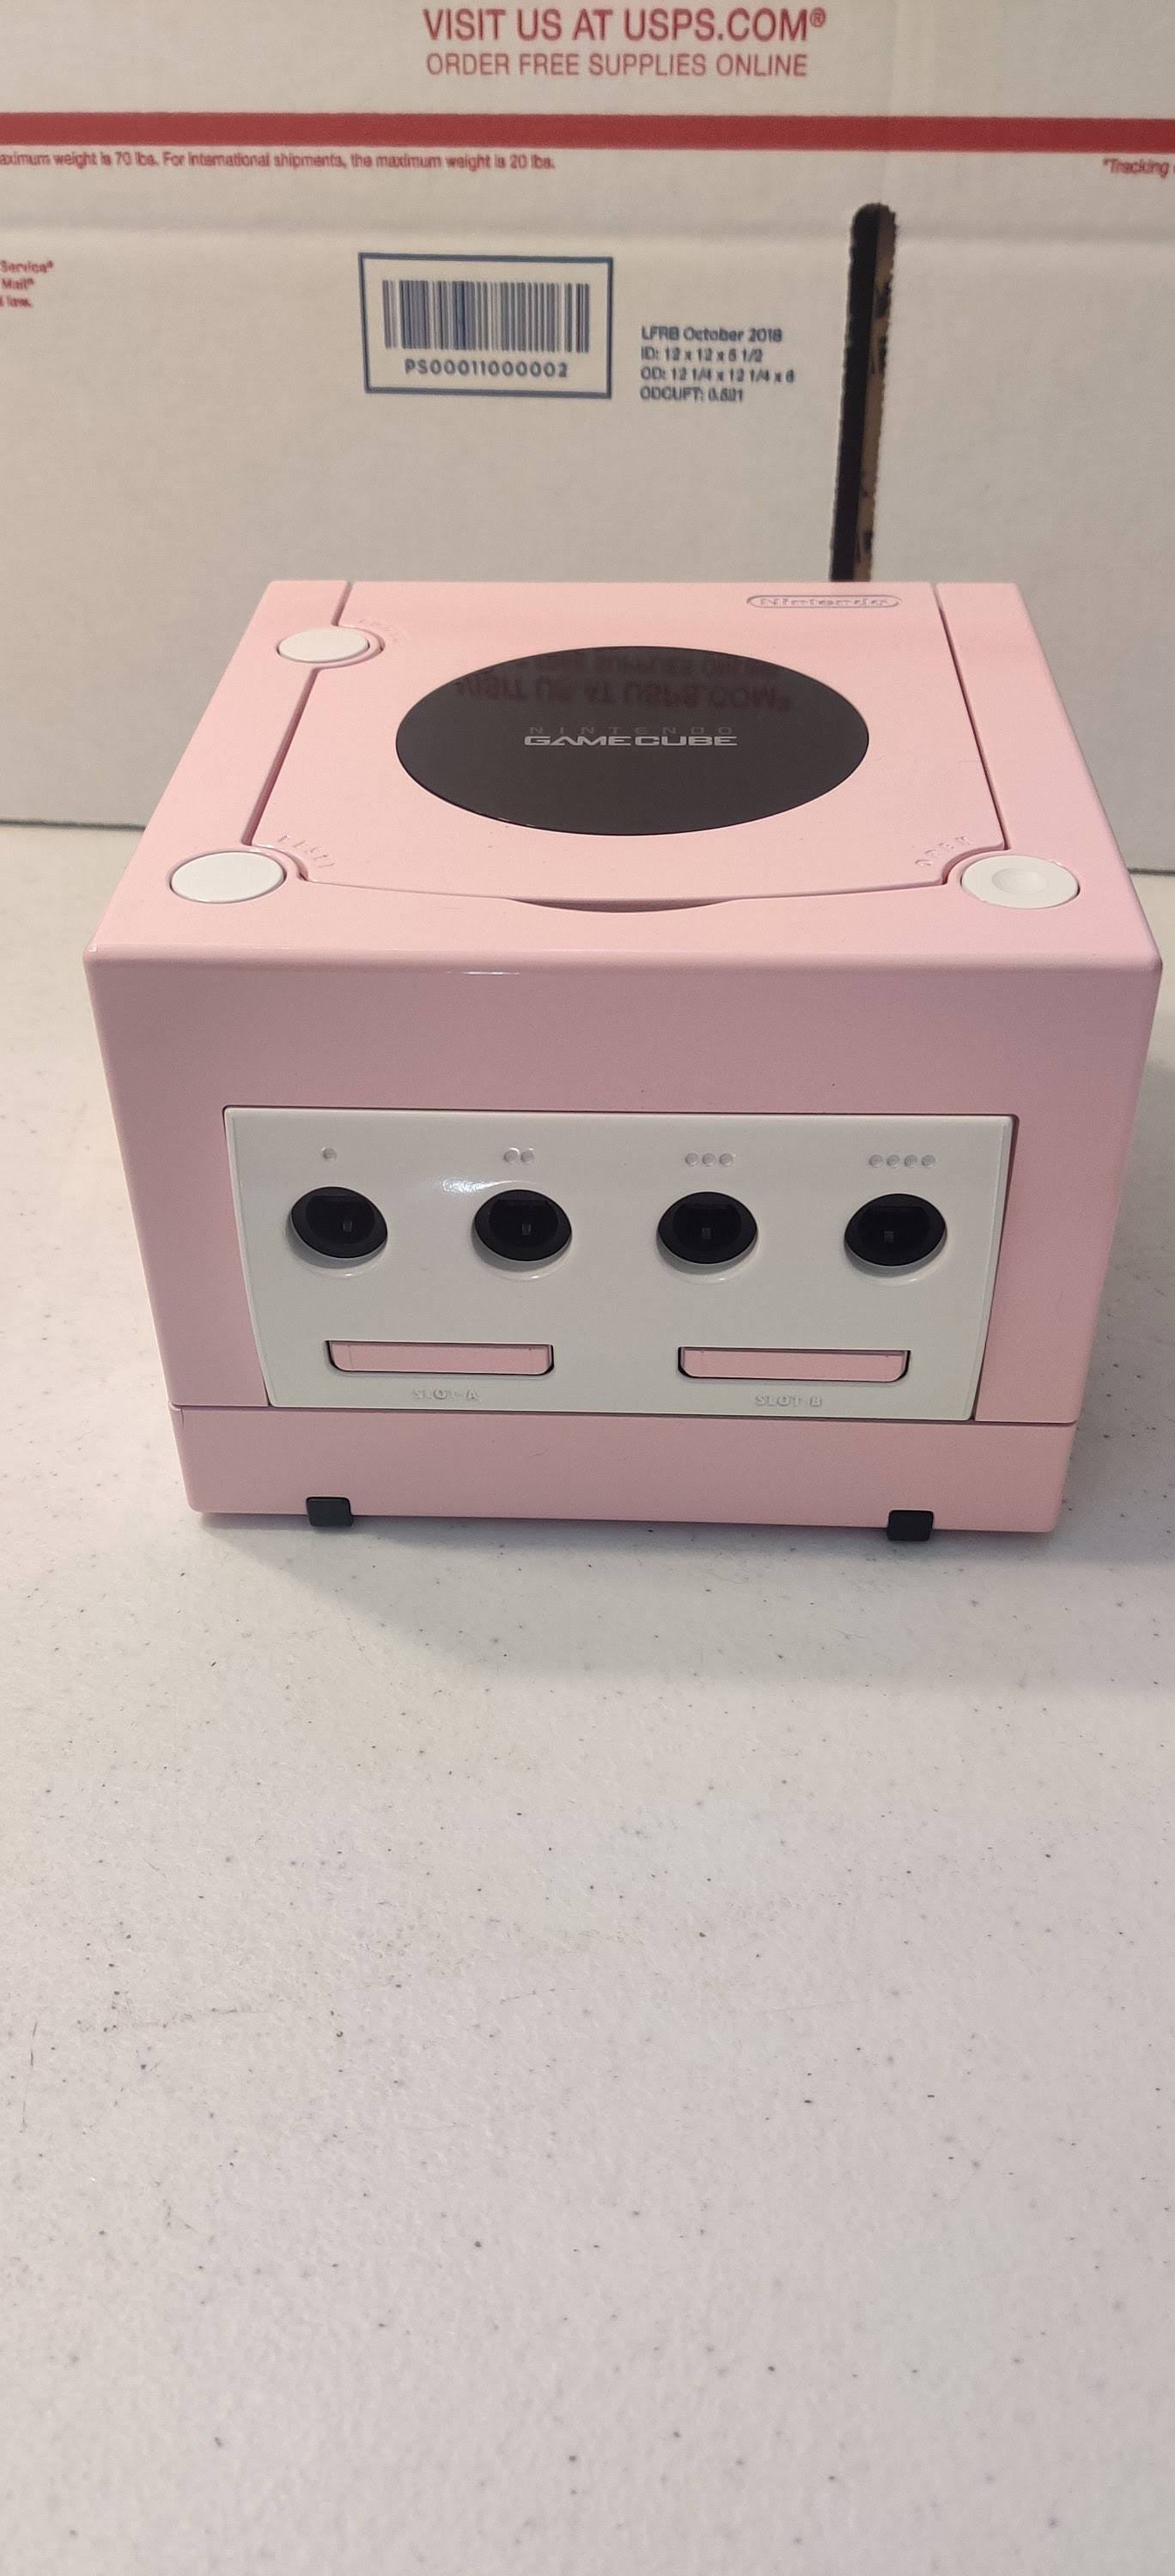 Gamecube Console - Light Pink And White (Dol-001)